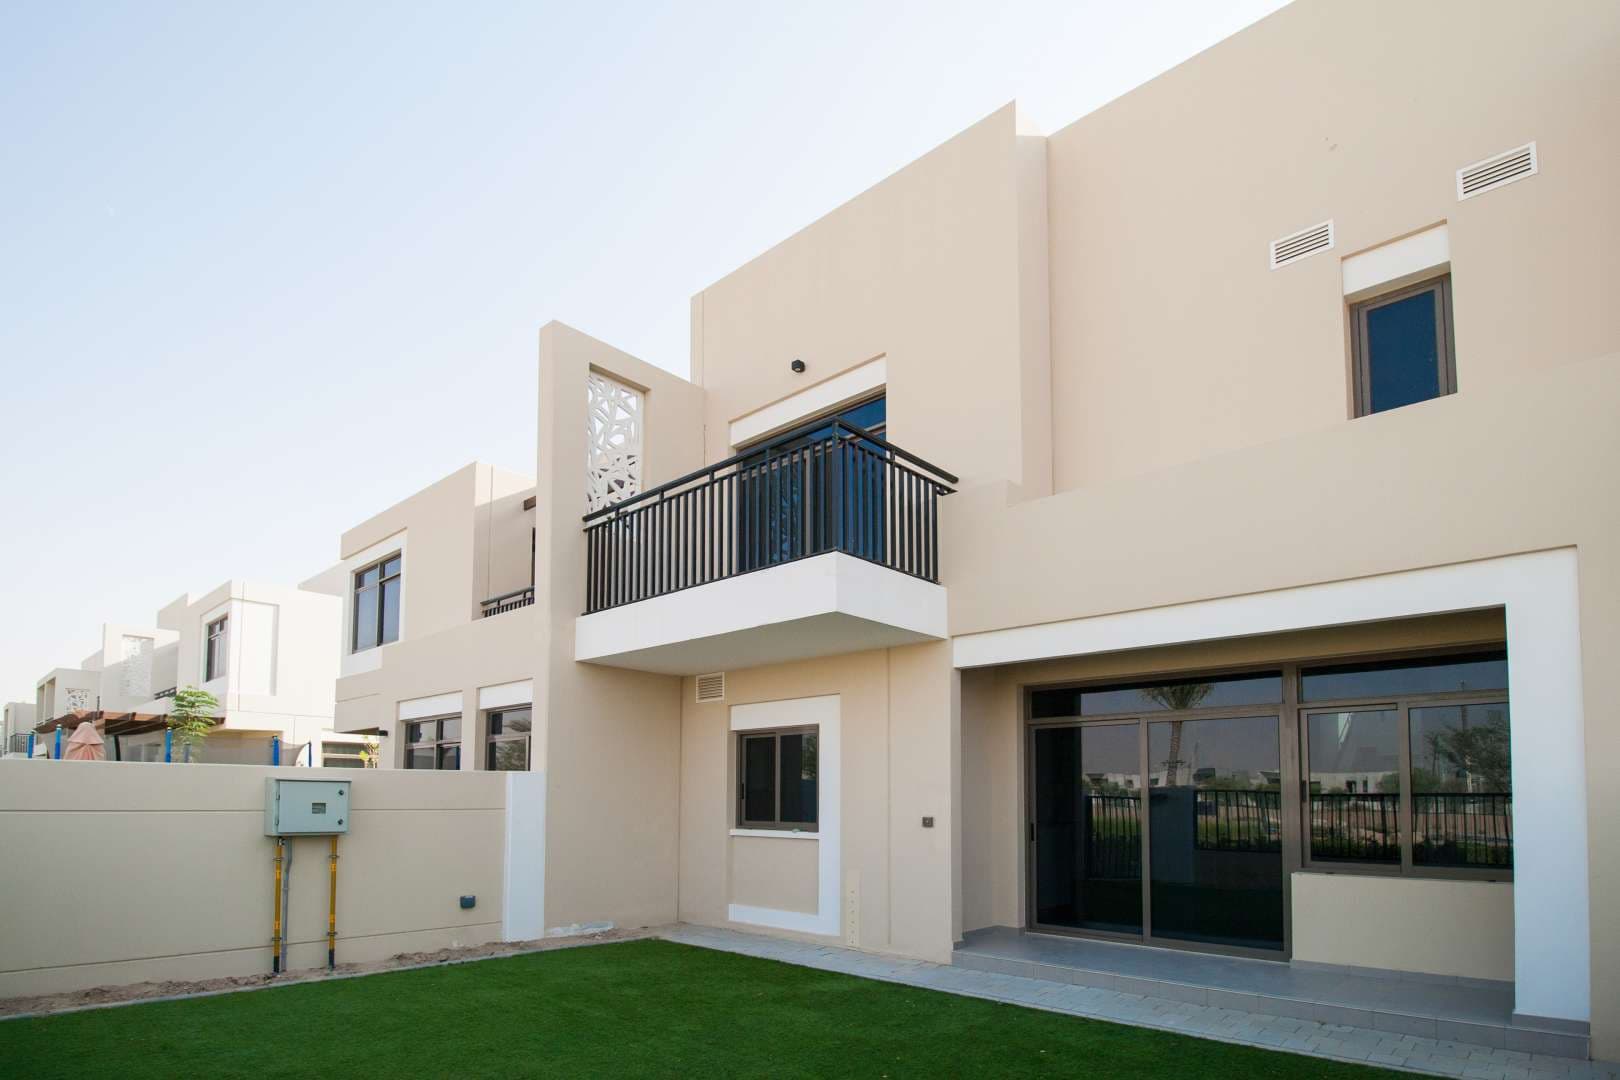 3 Bedroom Townhouse For Sale Safi Townhouses Lp07973 2ed69102776bc800.jpg